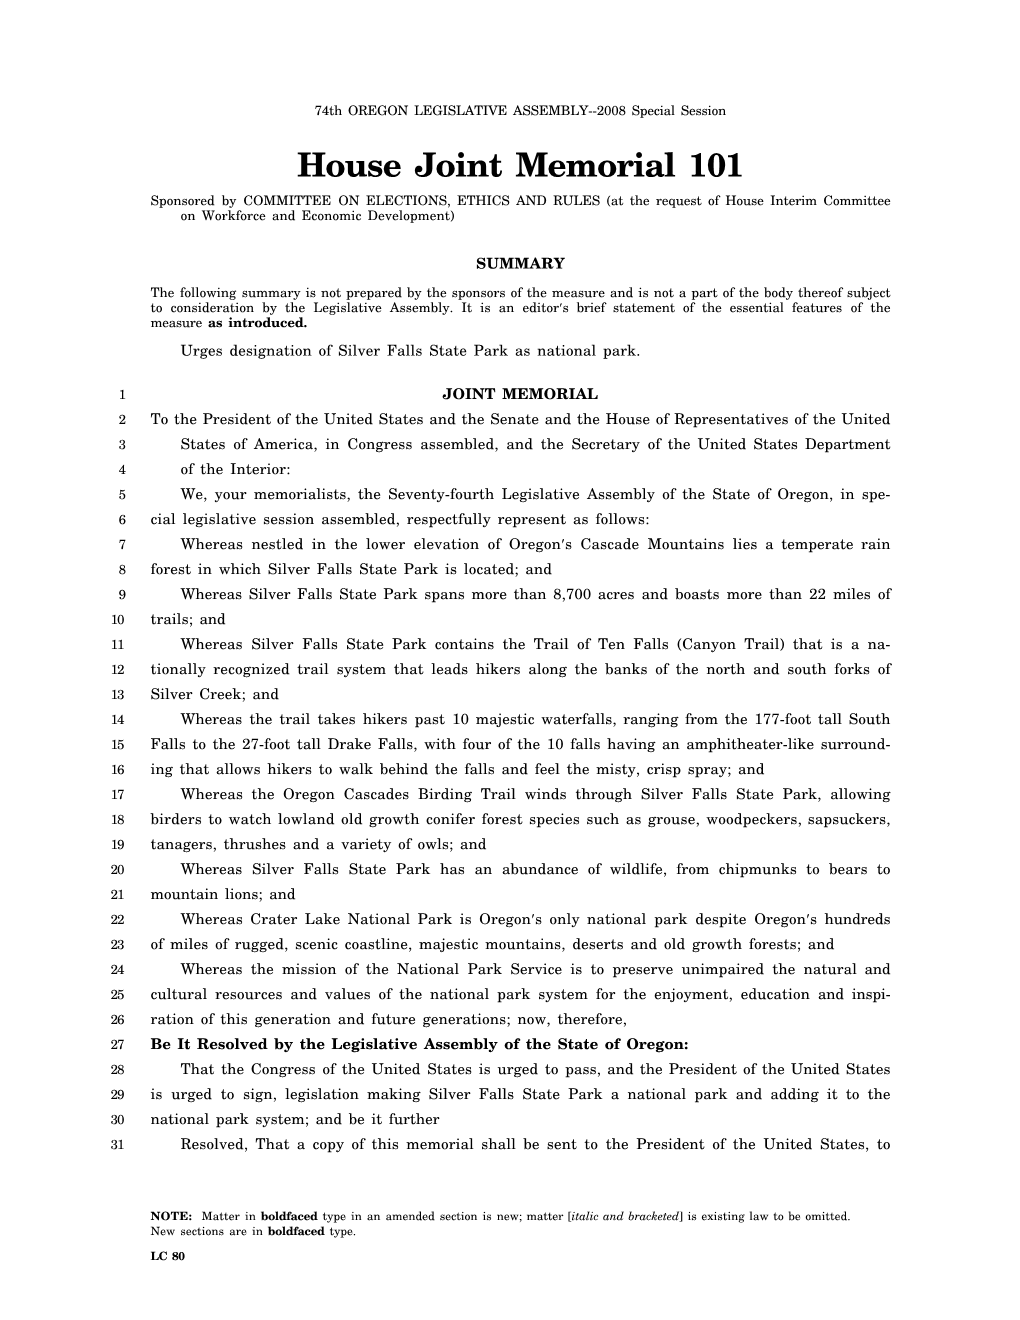 House Joint Memorial 101 Sponsored by COMMITTEE on ELECTIONS, ETHICS and RULES (At the Request of House Interim Committee on Workforce and Economic Development)